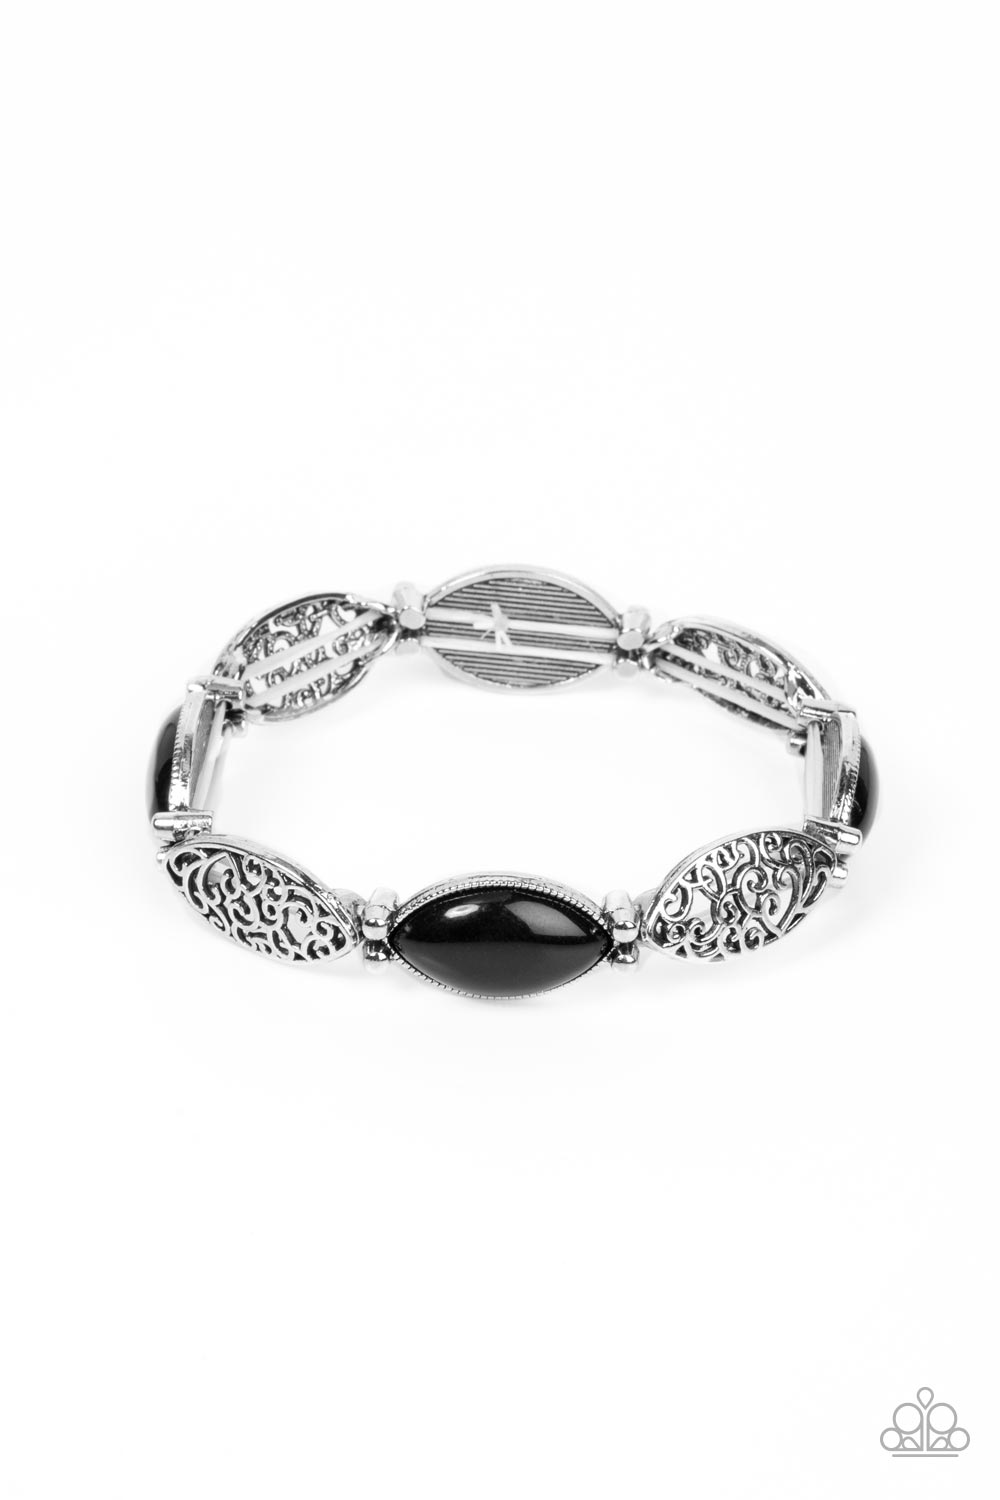 Garden Rendezvous - Black and Silver - Stretchy Bracelet - Paparazzi Accessories - Shiny black beads, set in daintily studded silver frames, mingle with frames of swirling silver filigree as they alternate along stretchy bands for a whimsically wild fashion around the wrist.